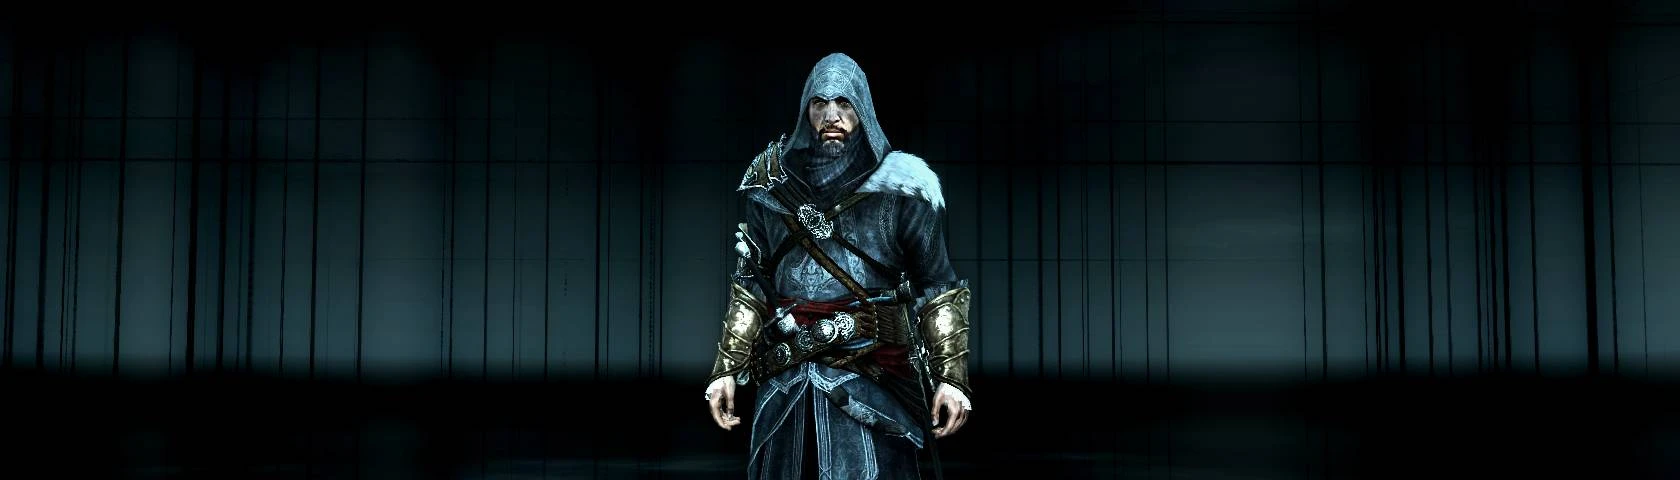 Assassin's Creed Revelations Support